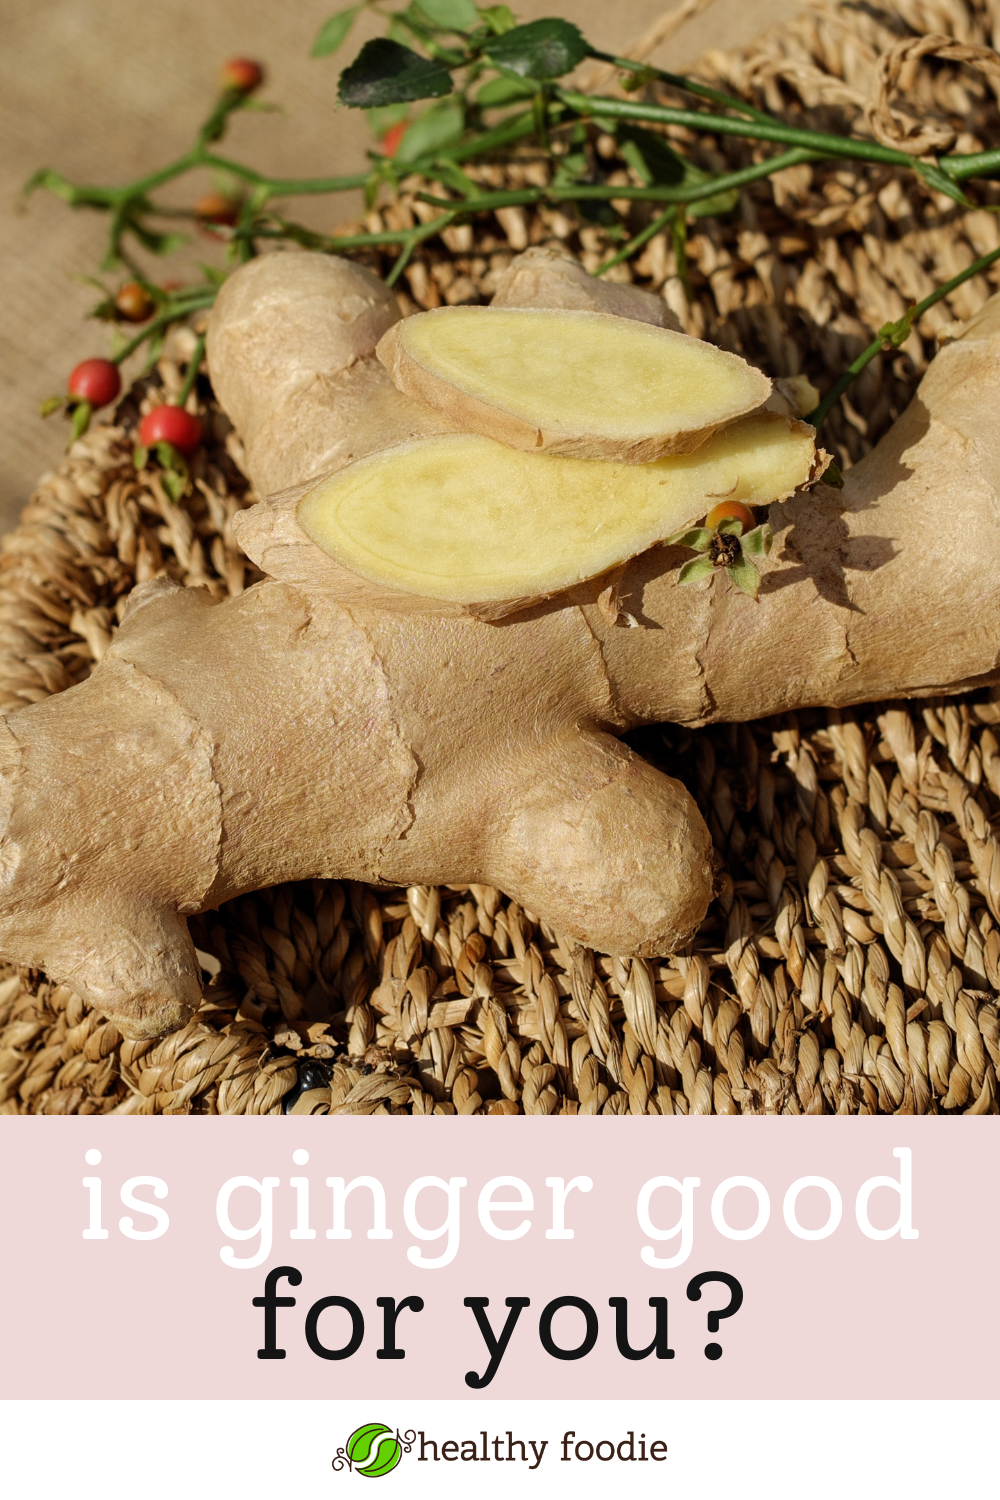 Is ginger good for you